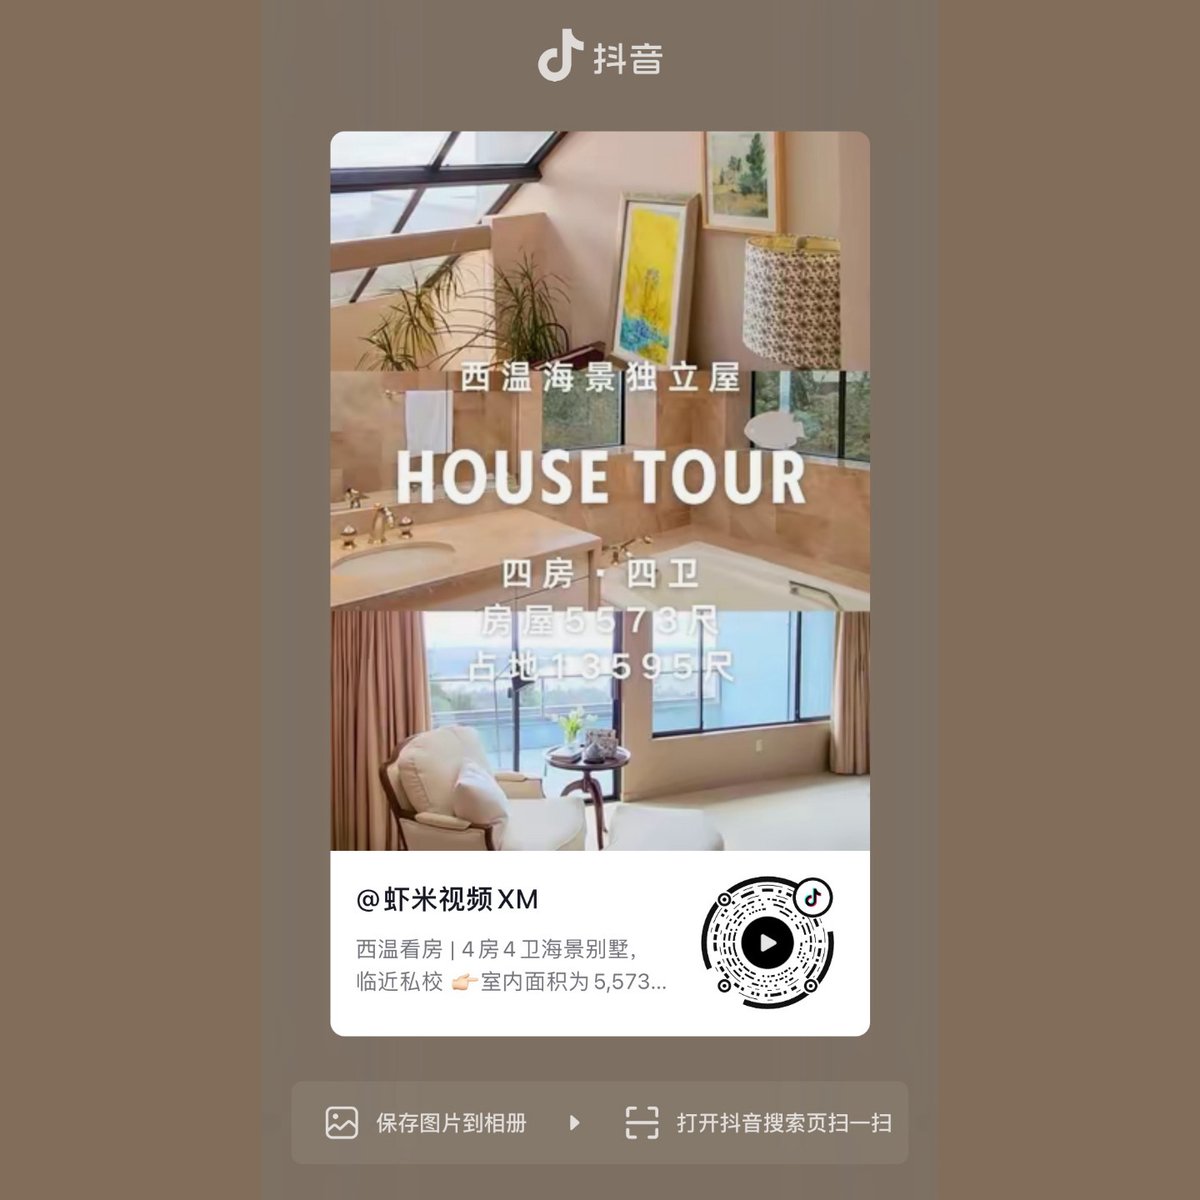 Whether you're a buyer or seller, follow Xiami Video for the latest updates🏡 
xhslink.com/oZmGkG

#xiamivideo #蝦米視頻XM #xyclemedia #redbook #小红书 #douyin #抖音  #houseforsale #westvan #vancouver #videomarketing #dianechenrealtor #vancouverproperty #realestatevancouver